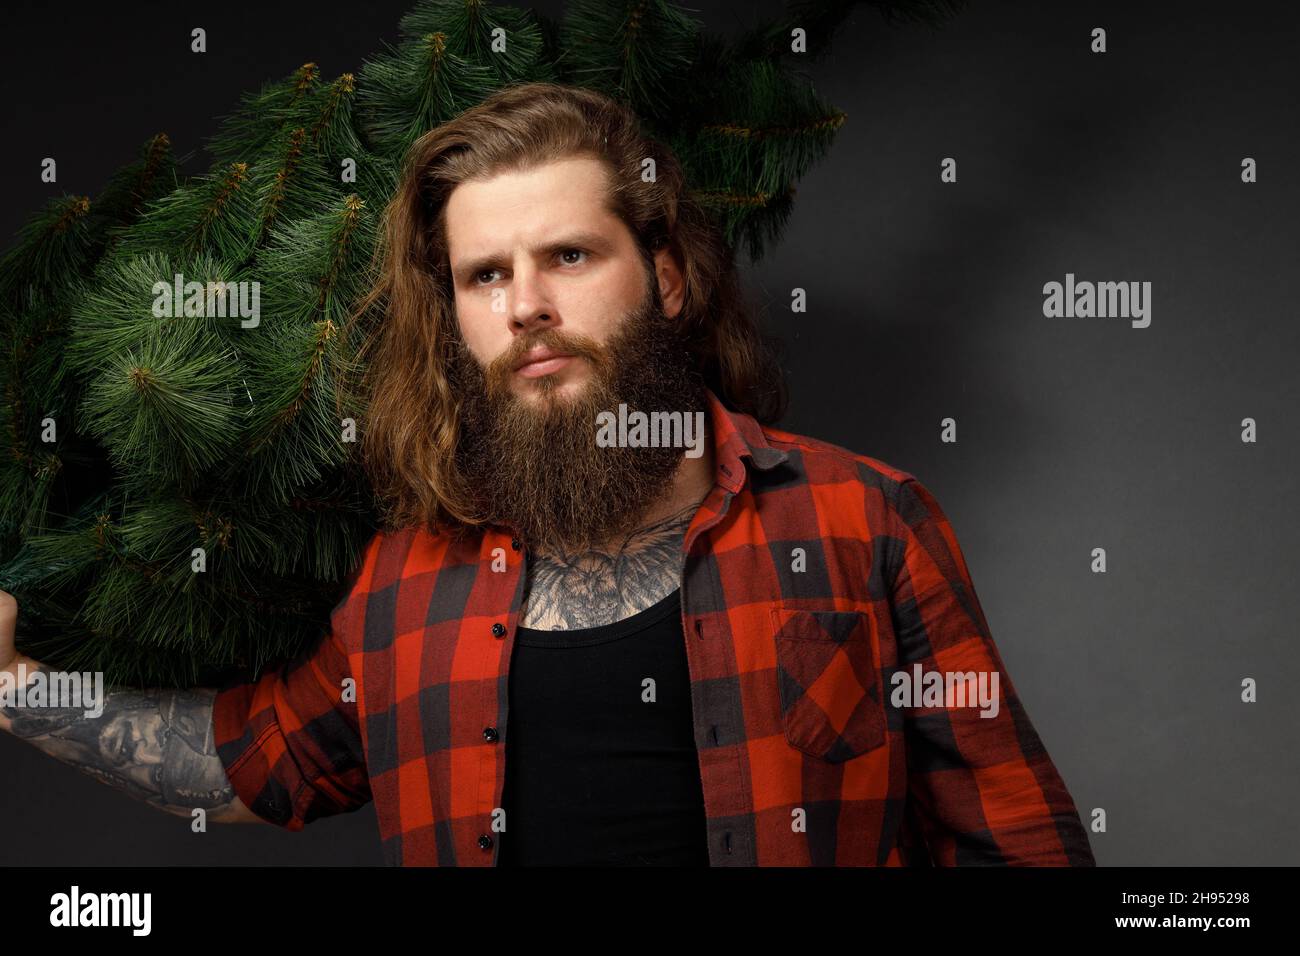 handsome man with long hair holding a synthetic christmas tree. Stock Photo